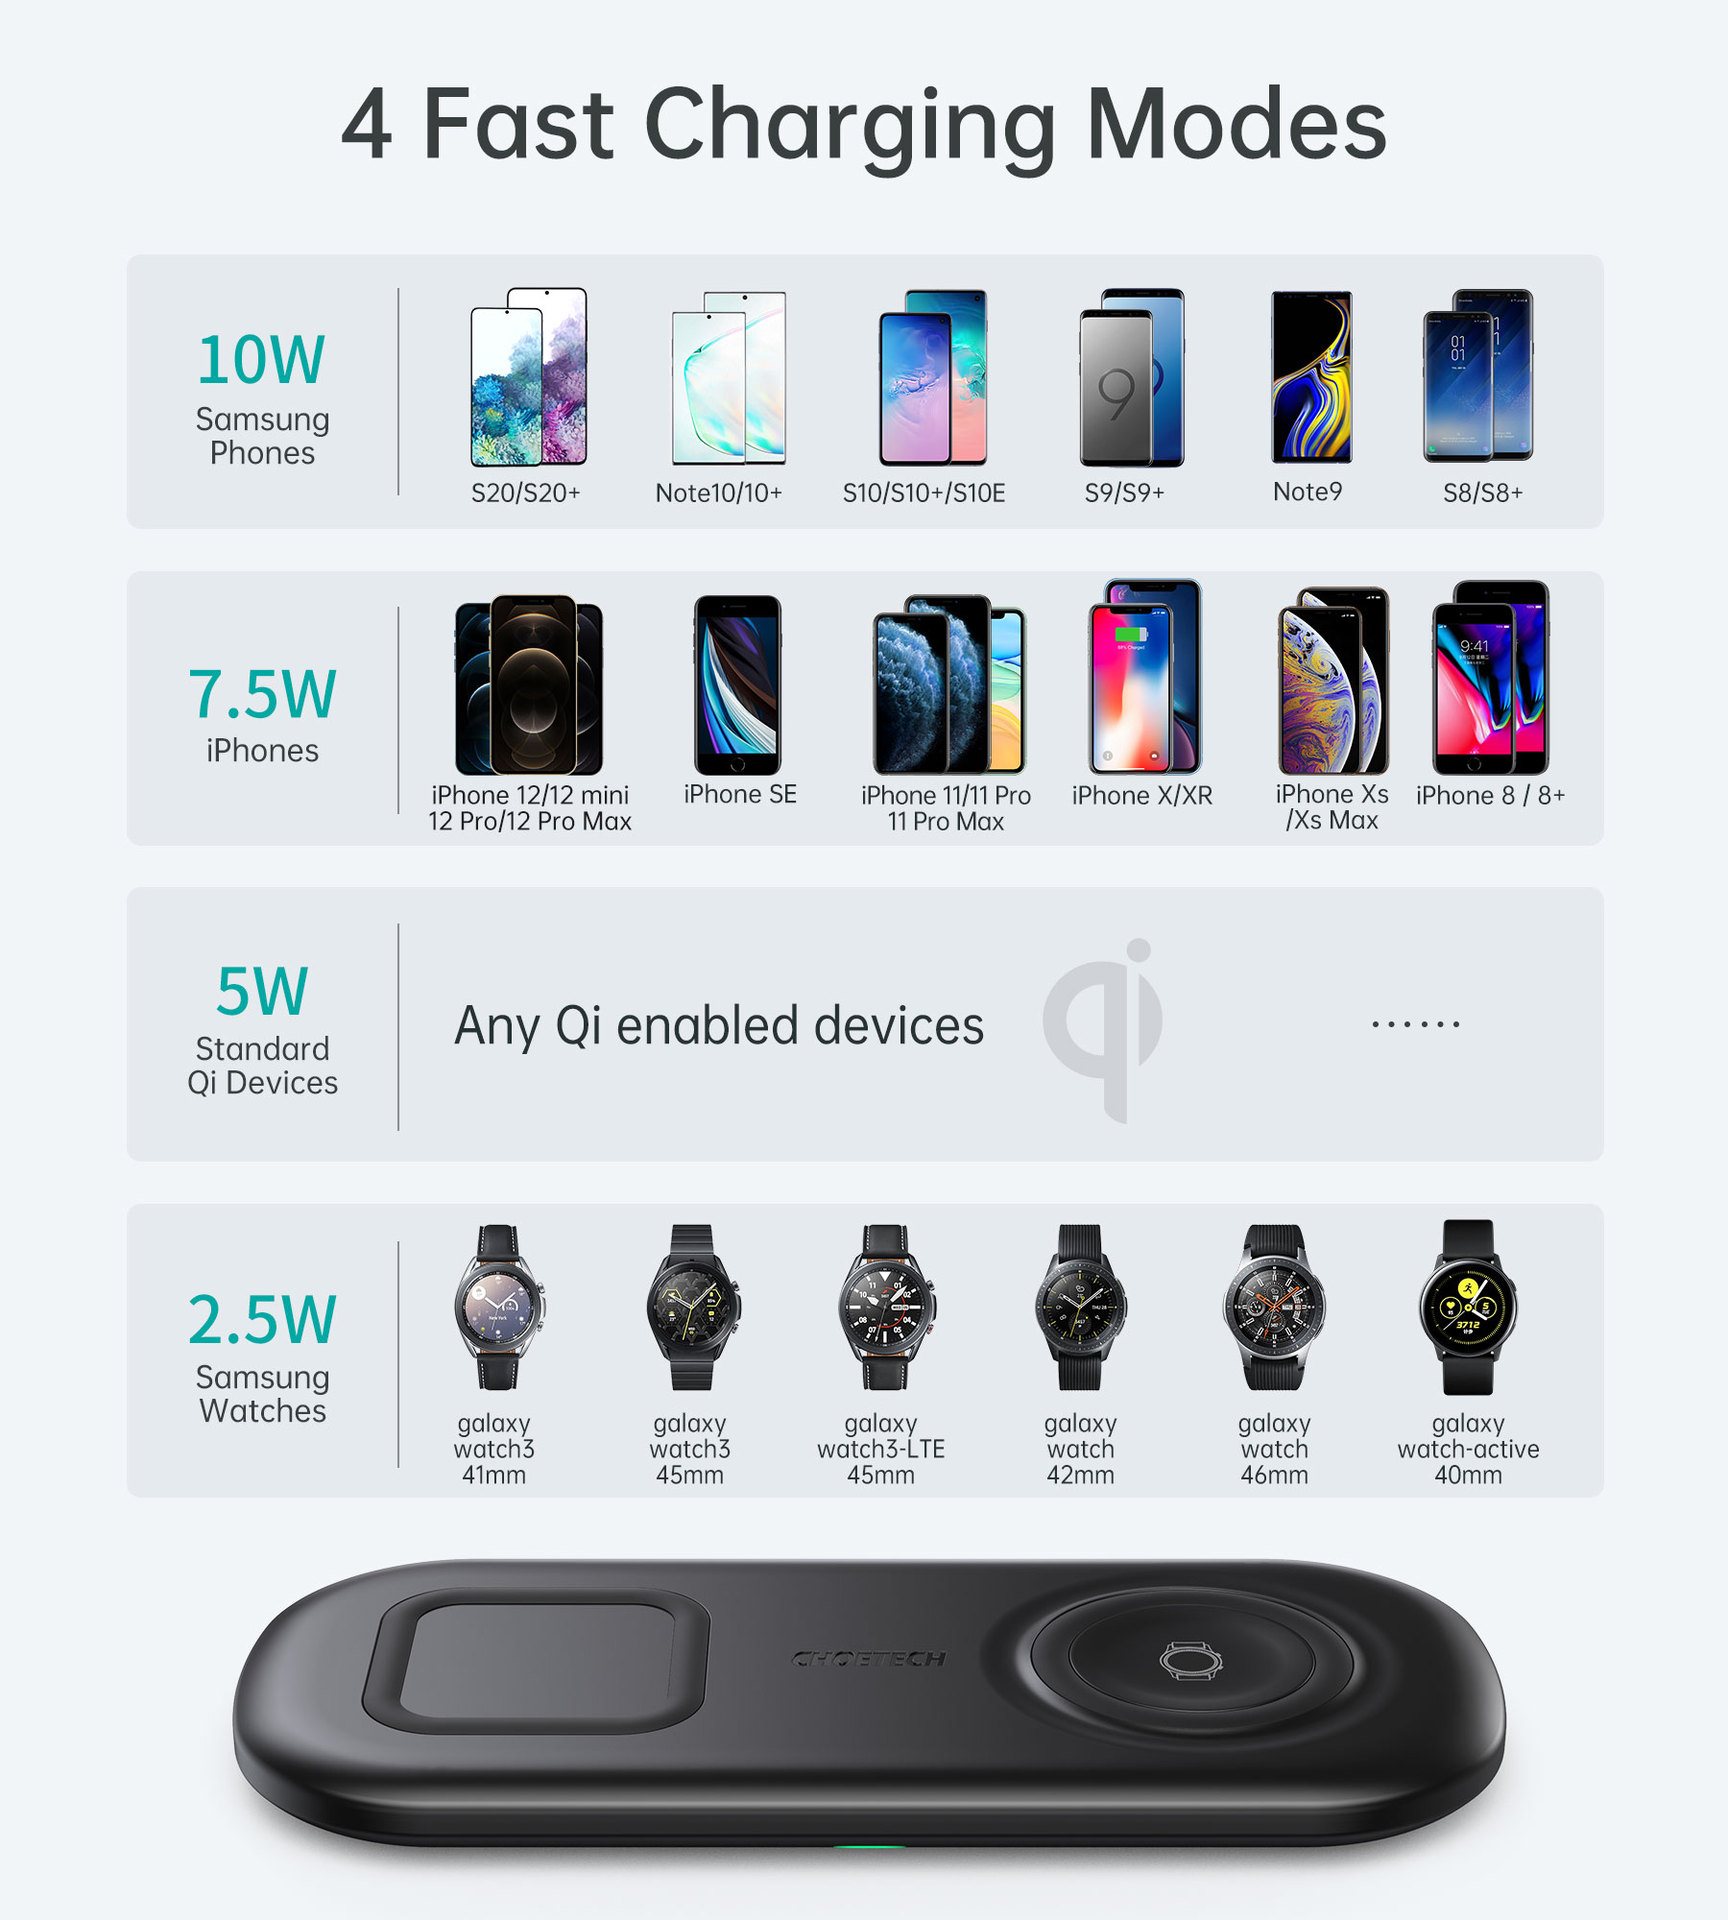 CHOETECH-10W-75W-5W-Wireless-Charger-Fast-Wireless-Charging-Pad-For-Qi-enabled-Smart-Phones-for-iPho-1925345-5